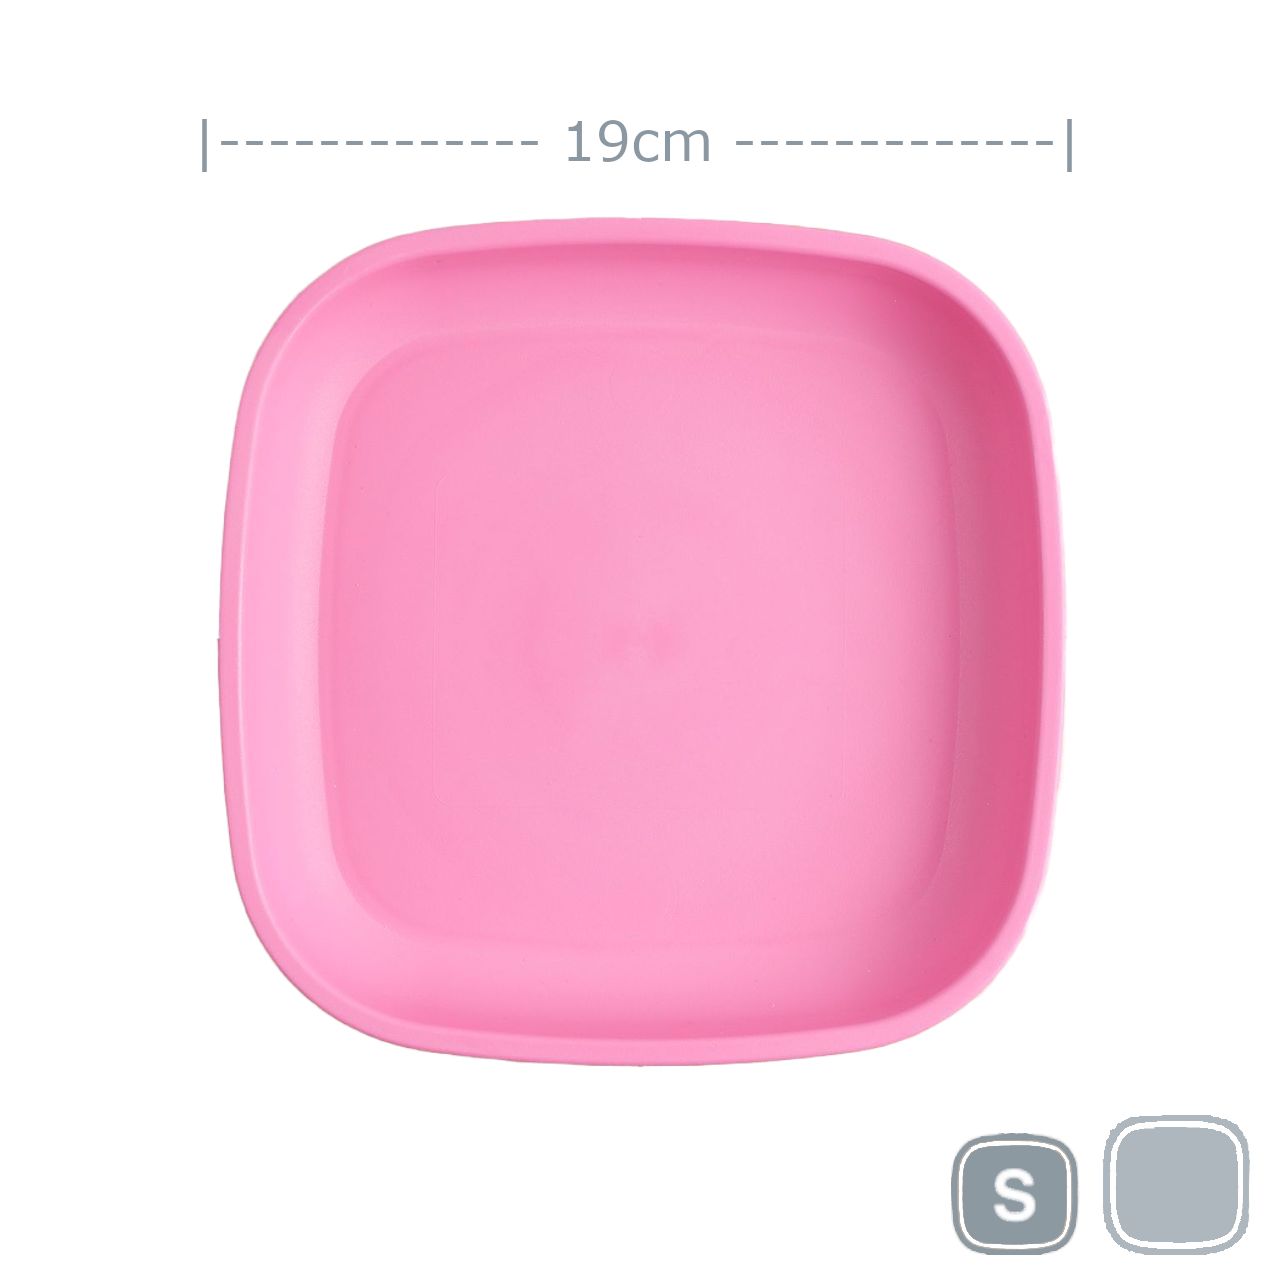 Replay Flat Plate - Bright Pink